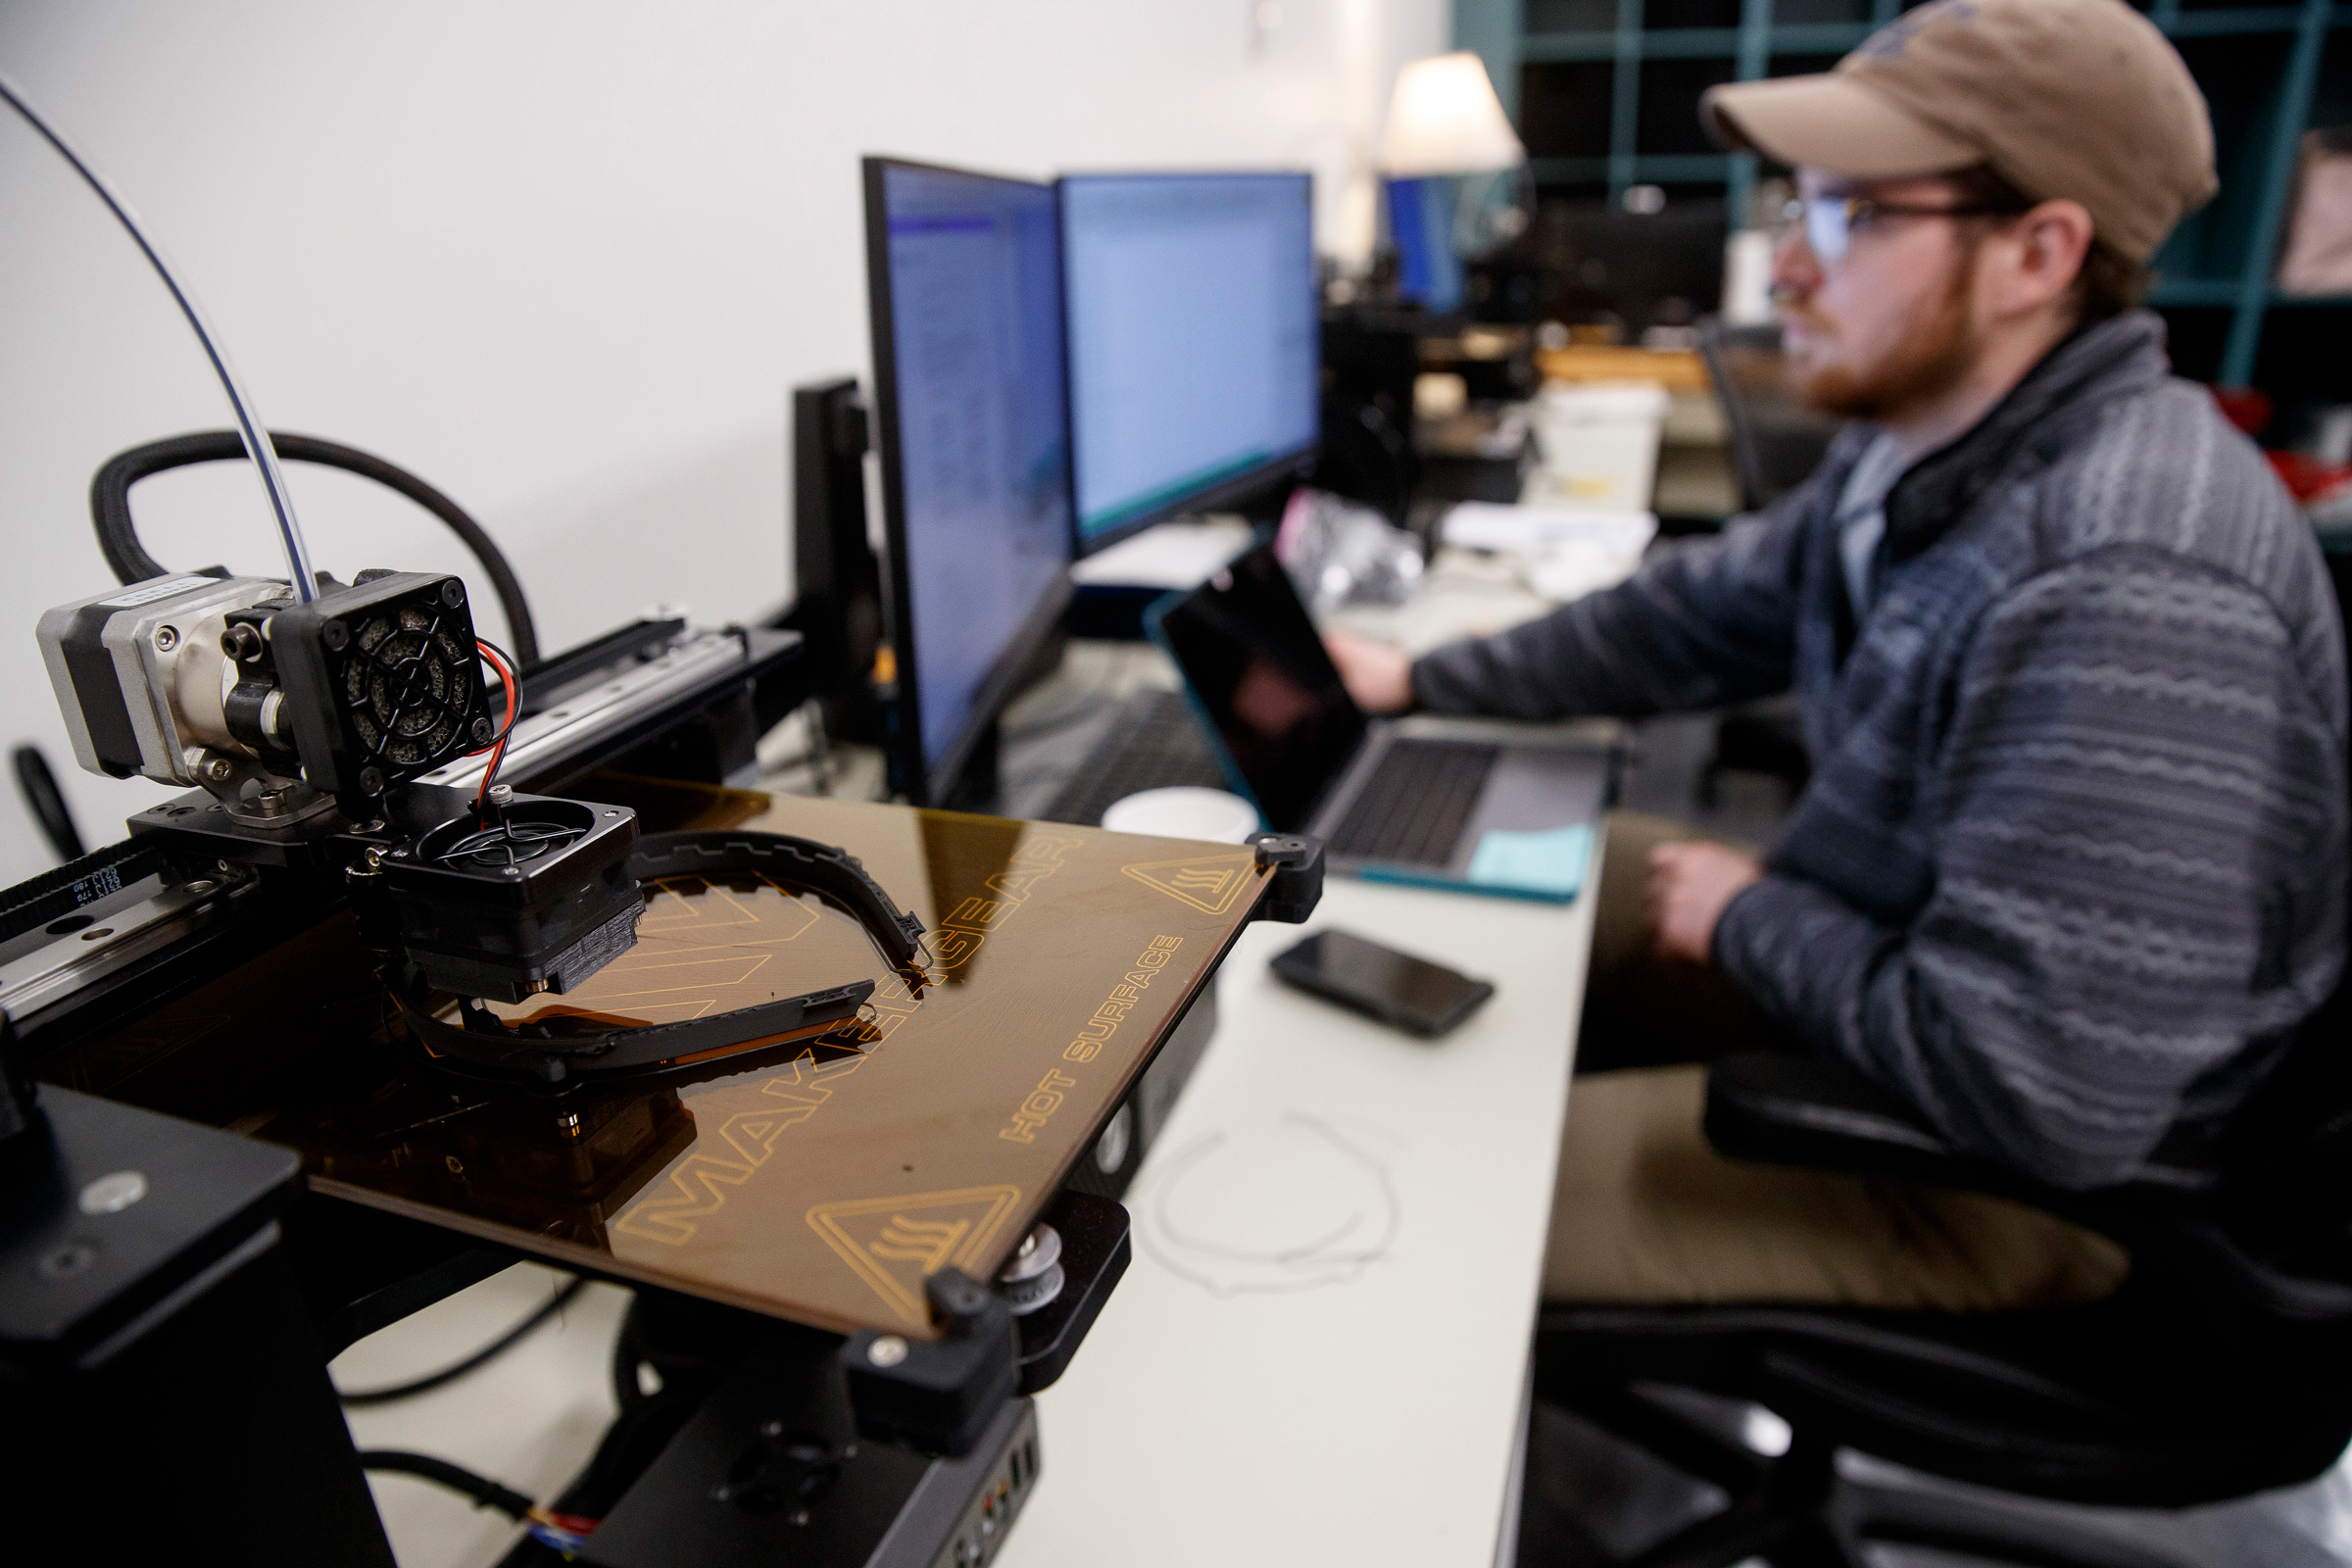 A UT Martin student works on a 3 D printer